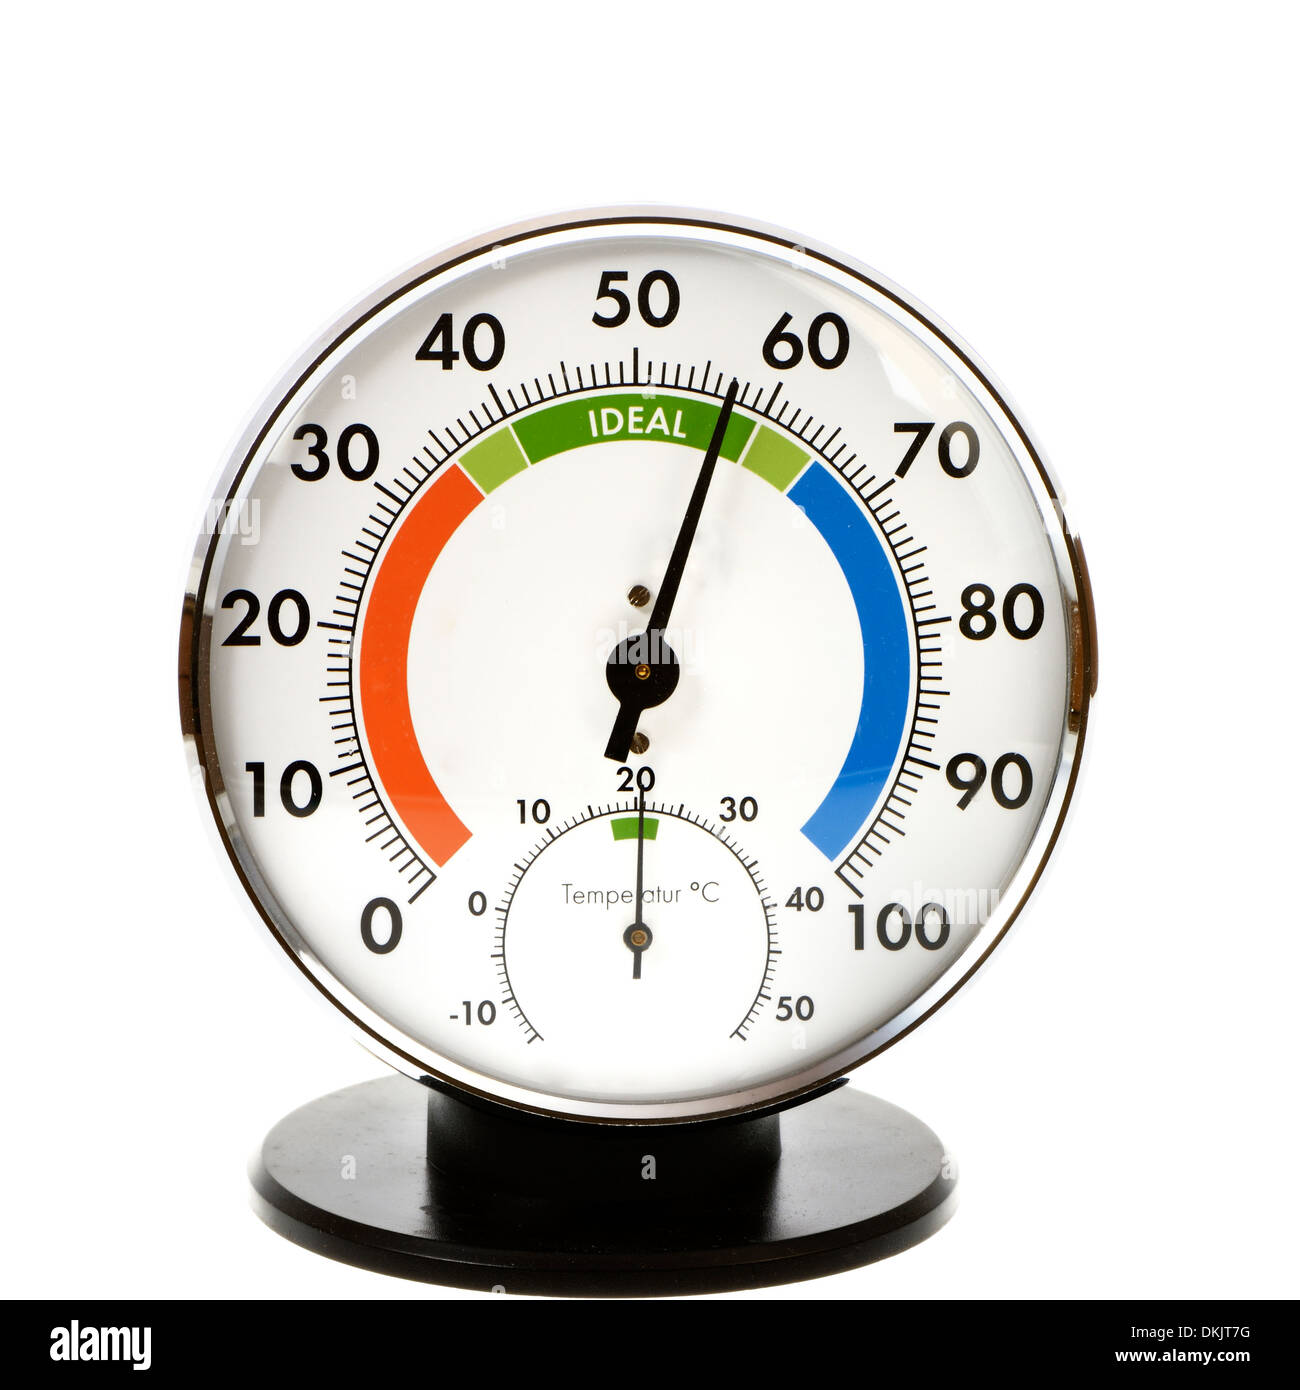 https://c8.alamy.com/comp/DKJT7G/analog-hygrometer-and-thermometer-everything-is-in-the-green-DKJT7G.jpg